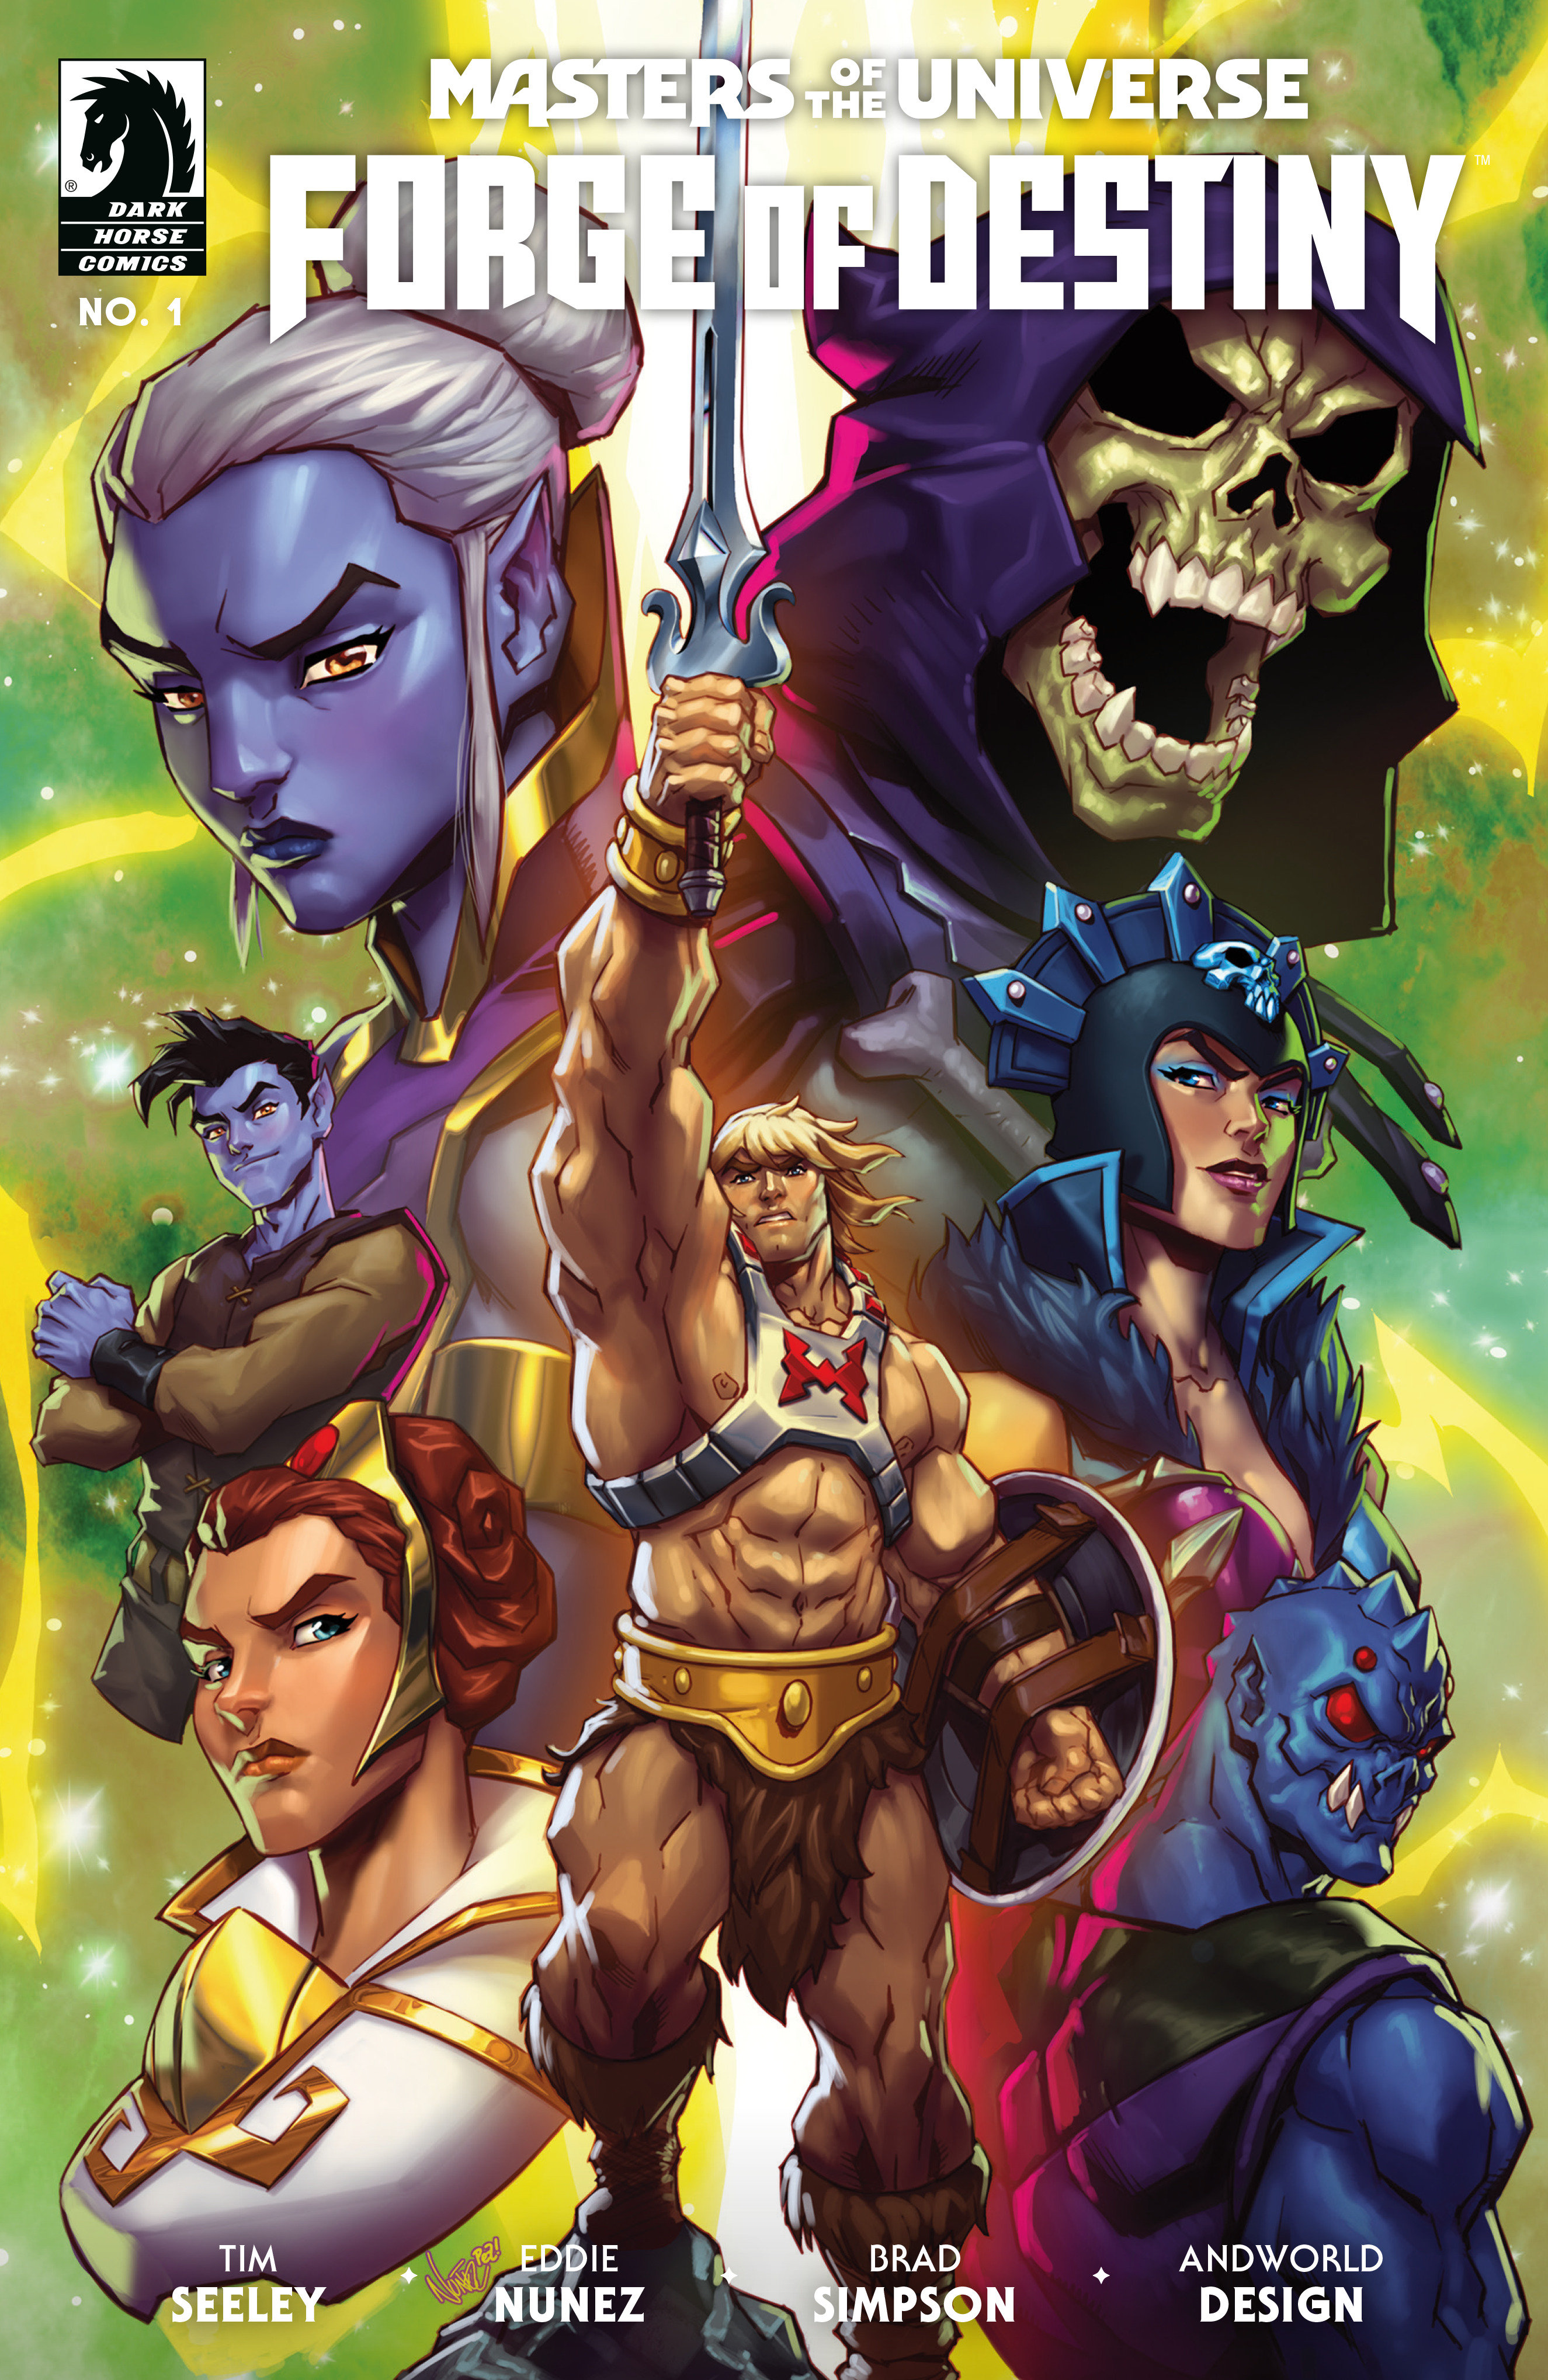 Masters of the Universe: Forge of Destiny #1 Cover A (Eddie Nunez)